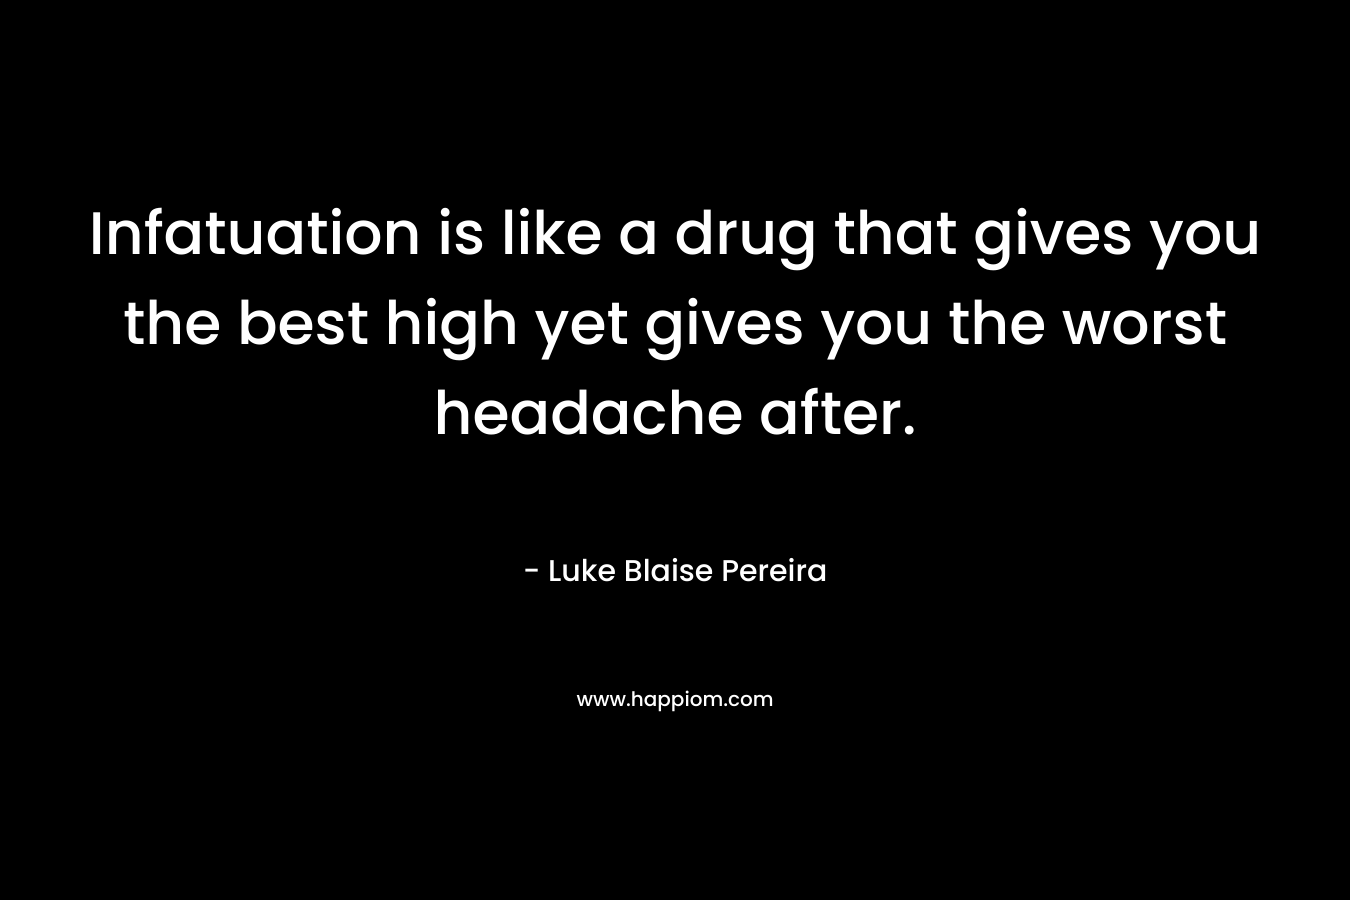 Infatuation is like a drug that gives you the best high yet gives you the worst headache after.